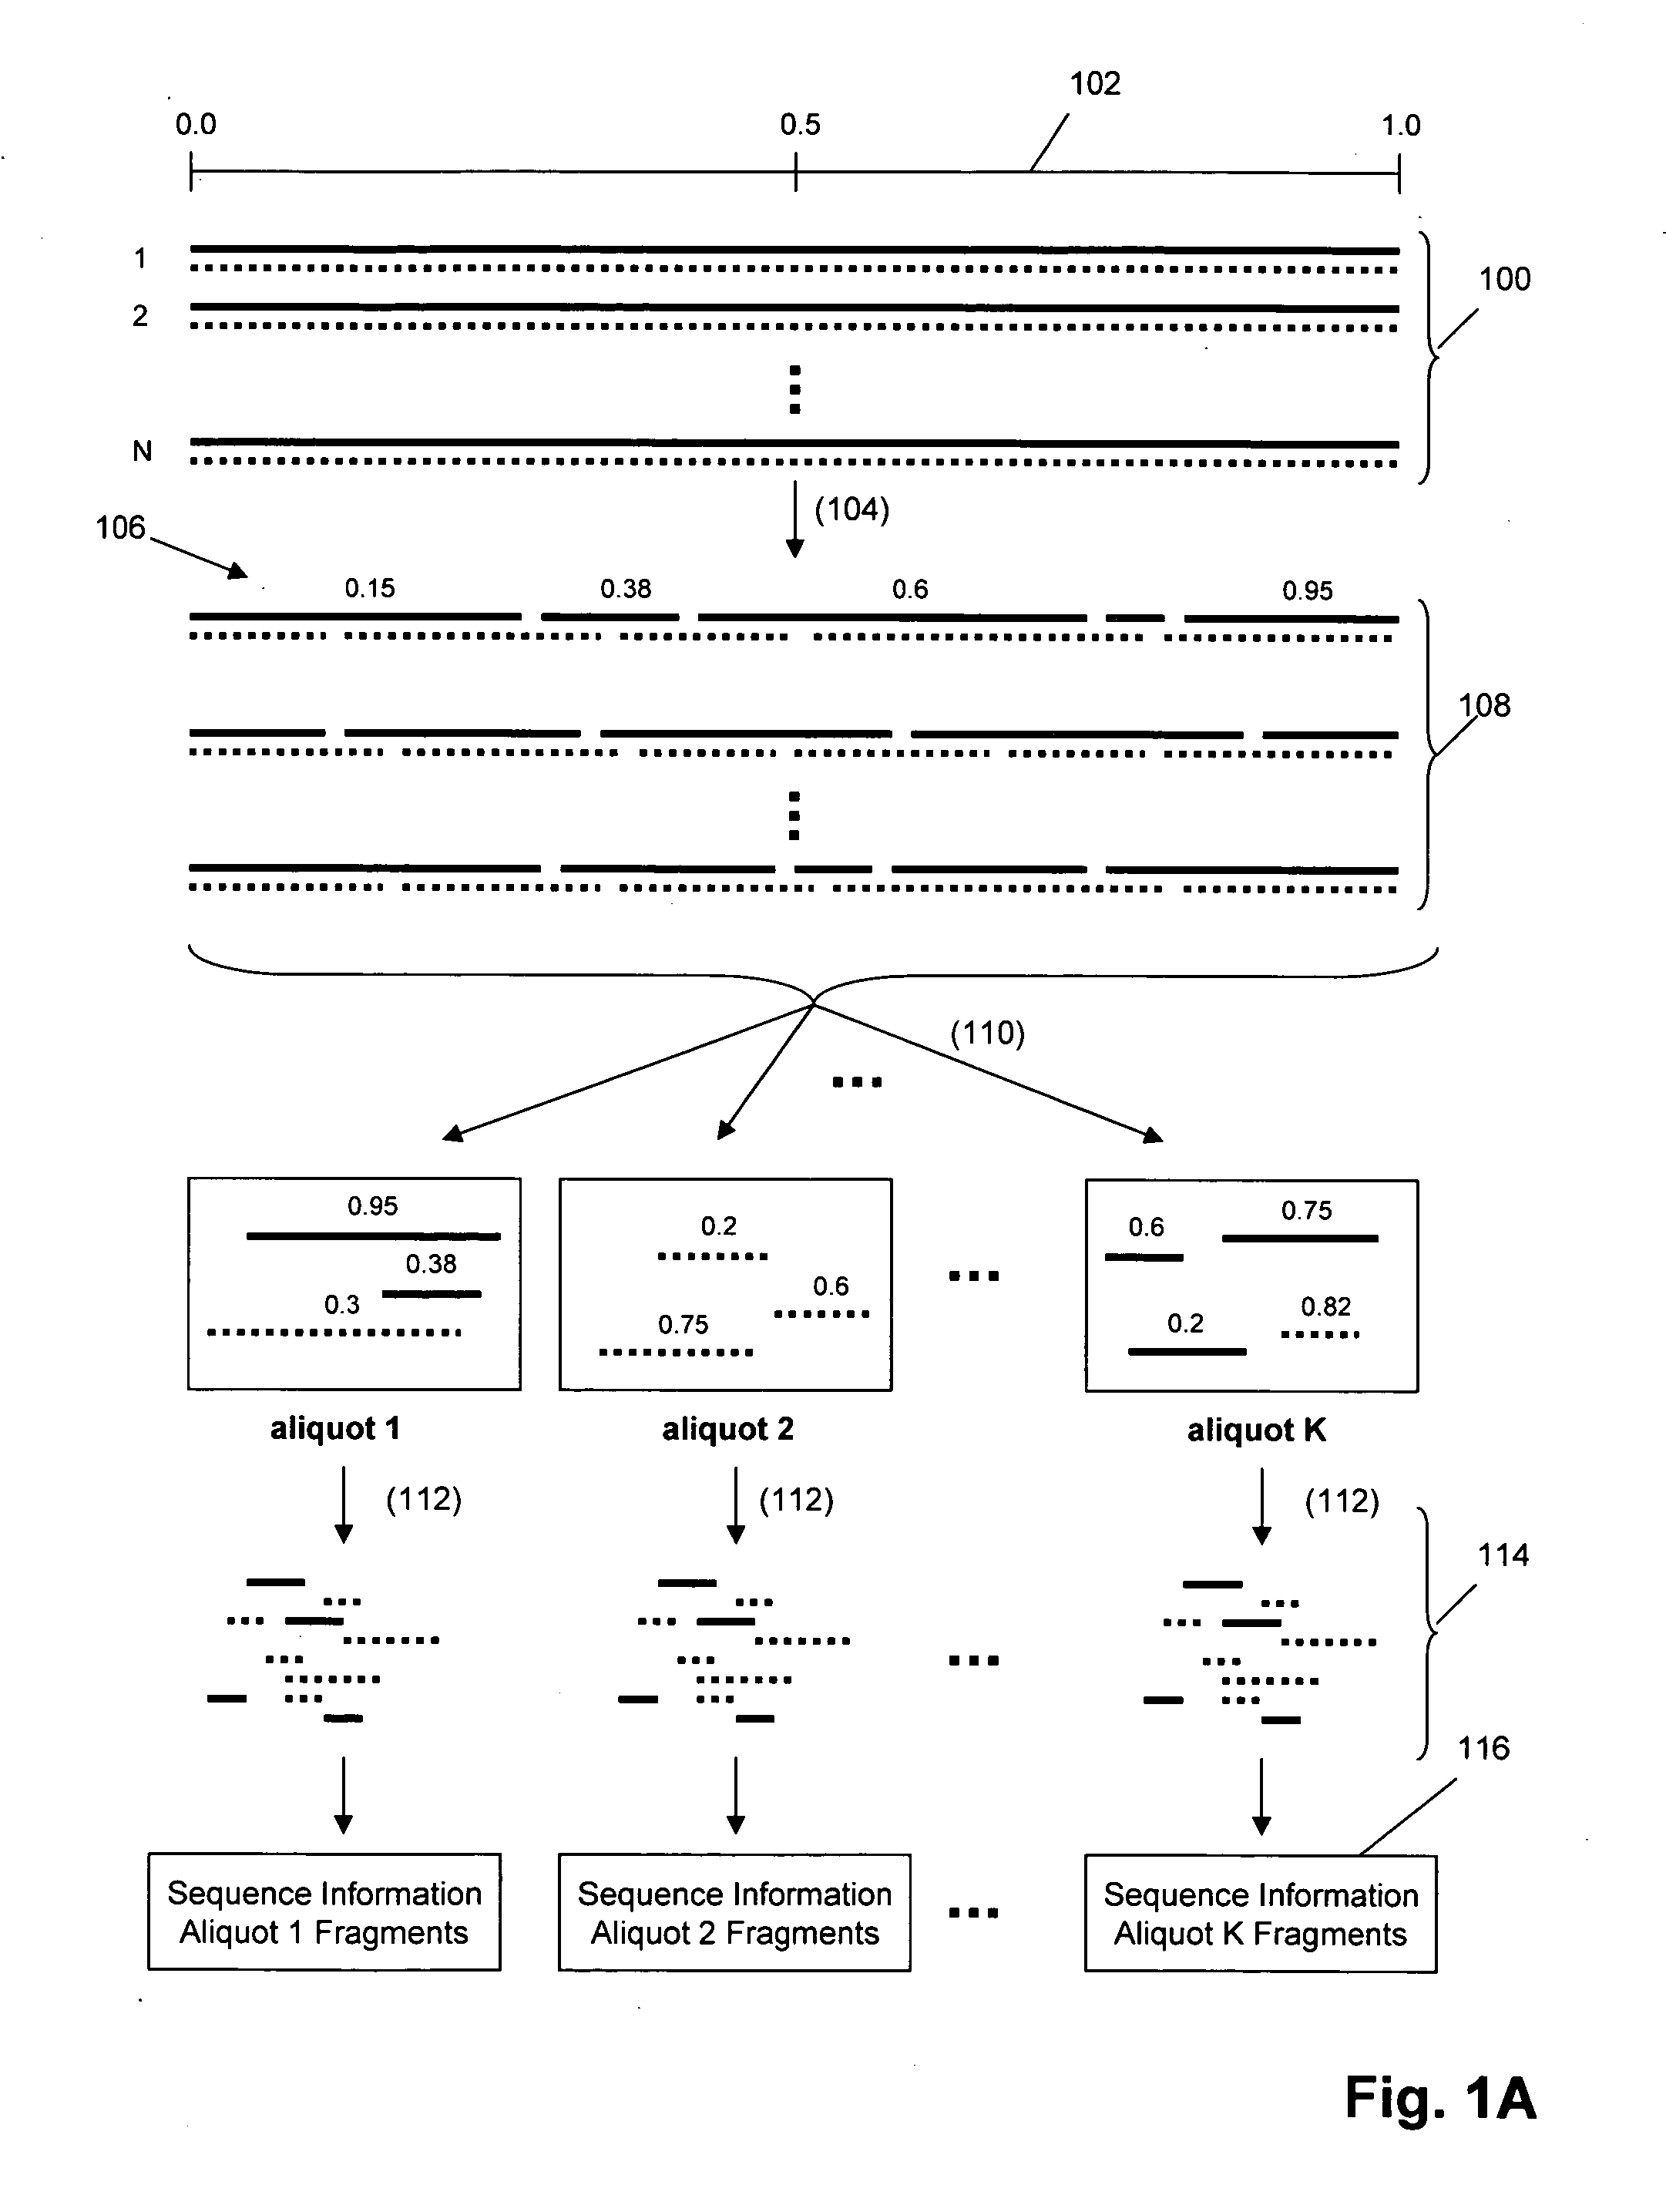 Nucleic acid analysis by random mixtures of non-overlapping fragments